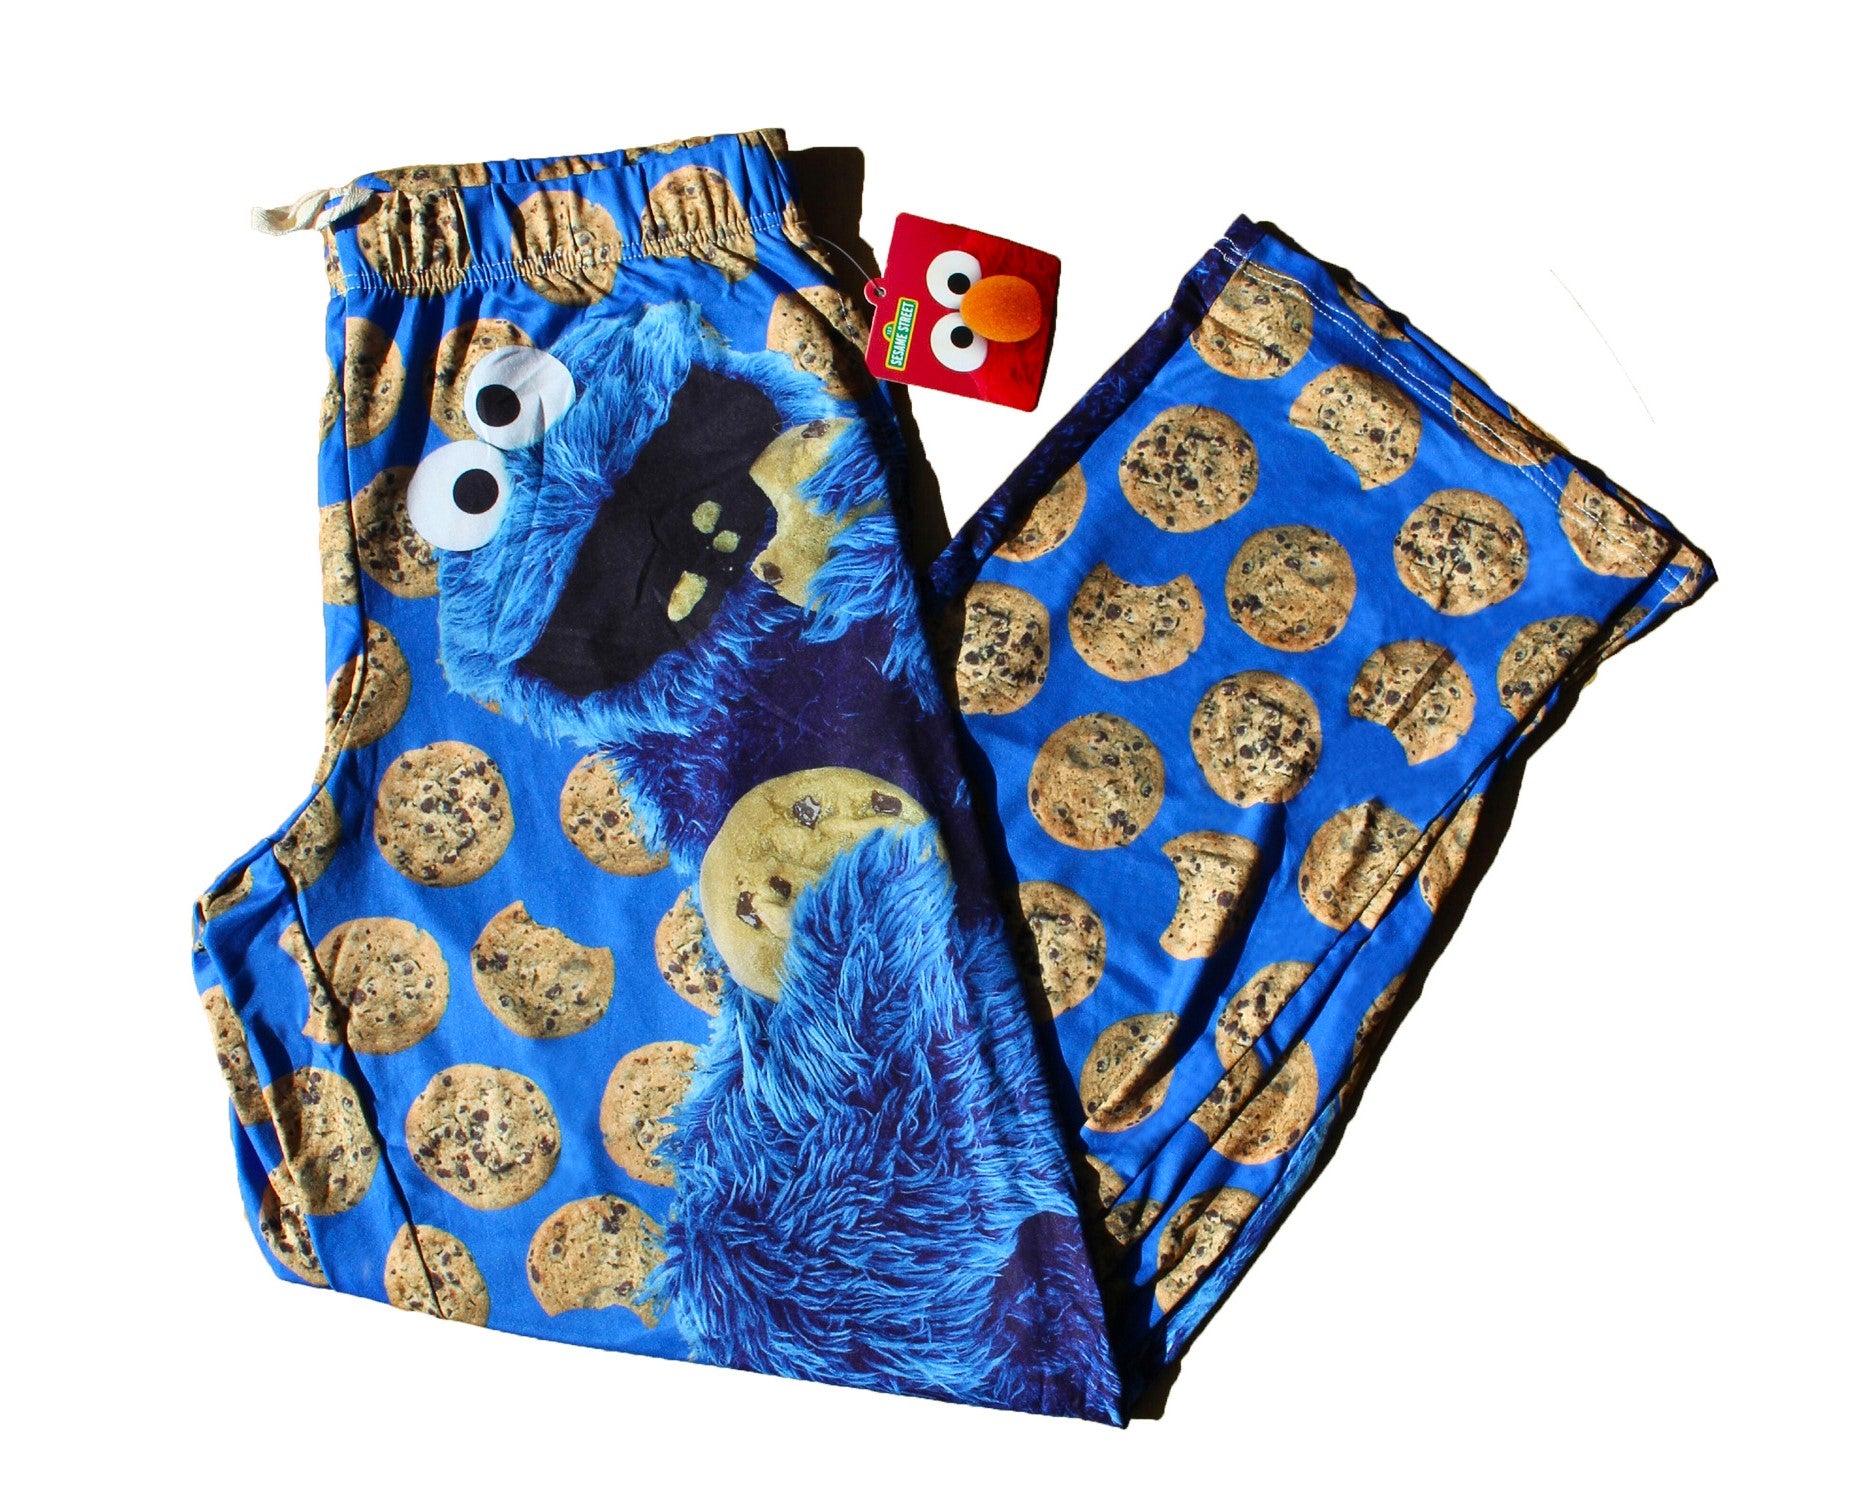 Cookie Monster pants laid out with white background